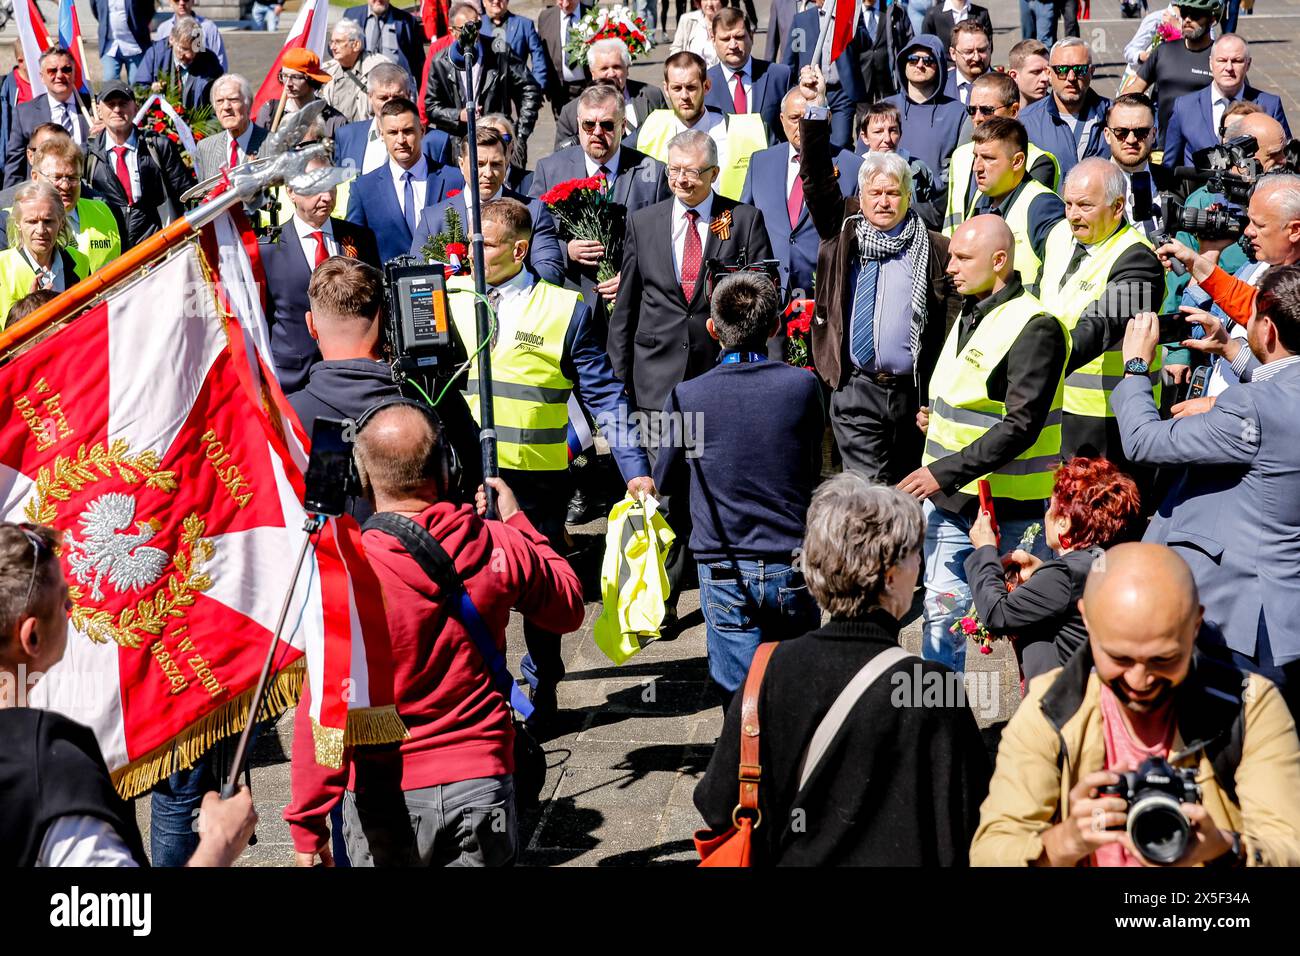 Russians ambassador to Poland, Sergey Andreyev arrives to lay flowers at the Mausoleum of the Soviet Soldiers Cemetery on Russian Victory Day, May 9, 2024 in Warsaw, Poland. High security was present with the Russian Ambassador. Ukrainian protesters demonstrated as Russian ambassador arrived. Stock Photo